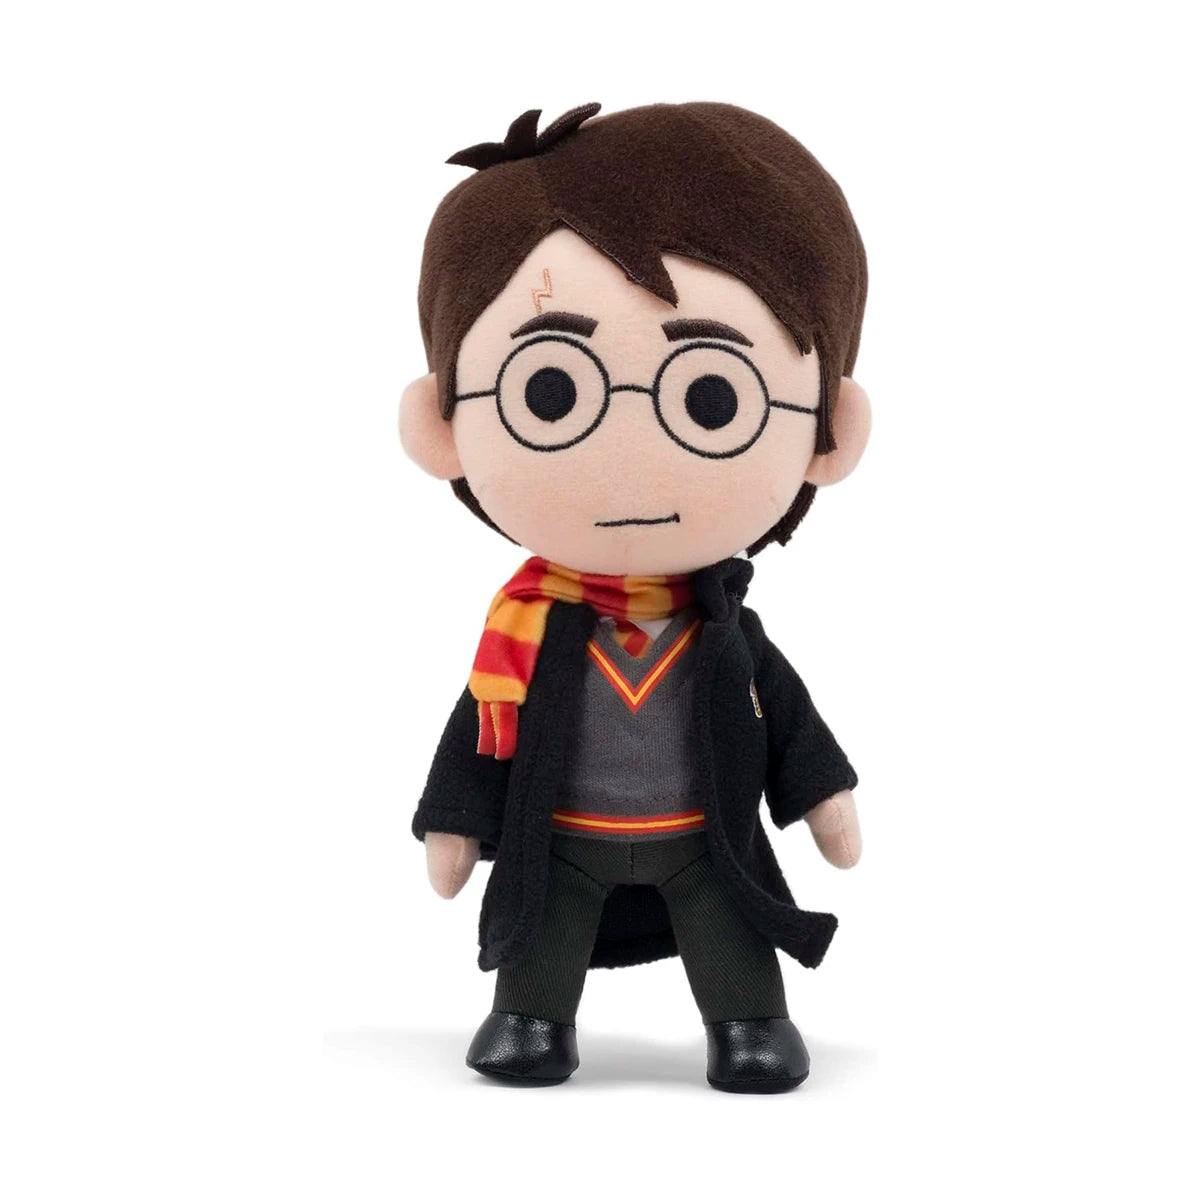 Harry Potter - Q-Pal Plush Peluche Toy 9" Gryffindor Scarf Sweater